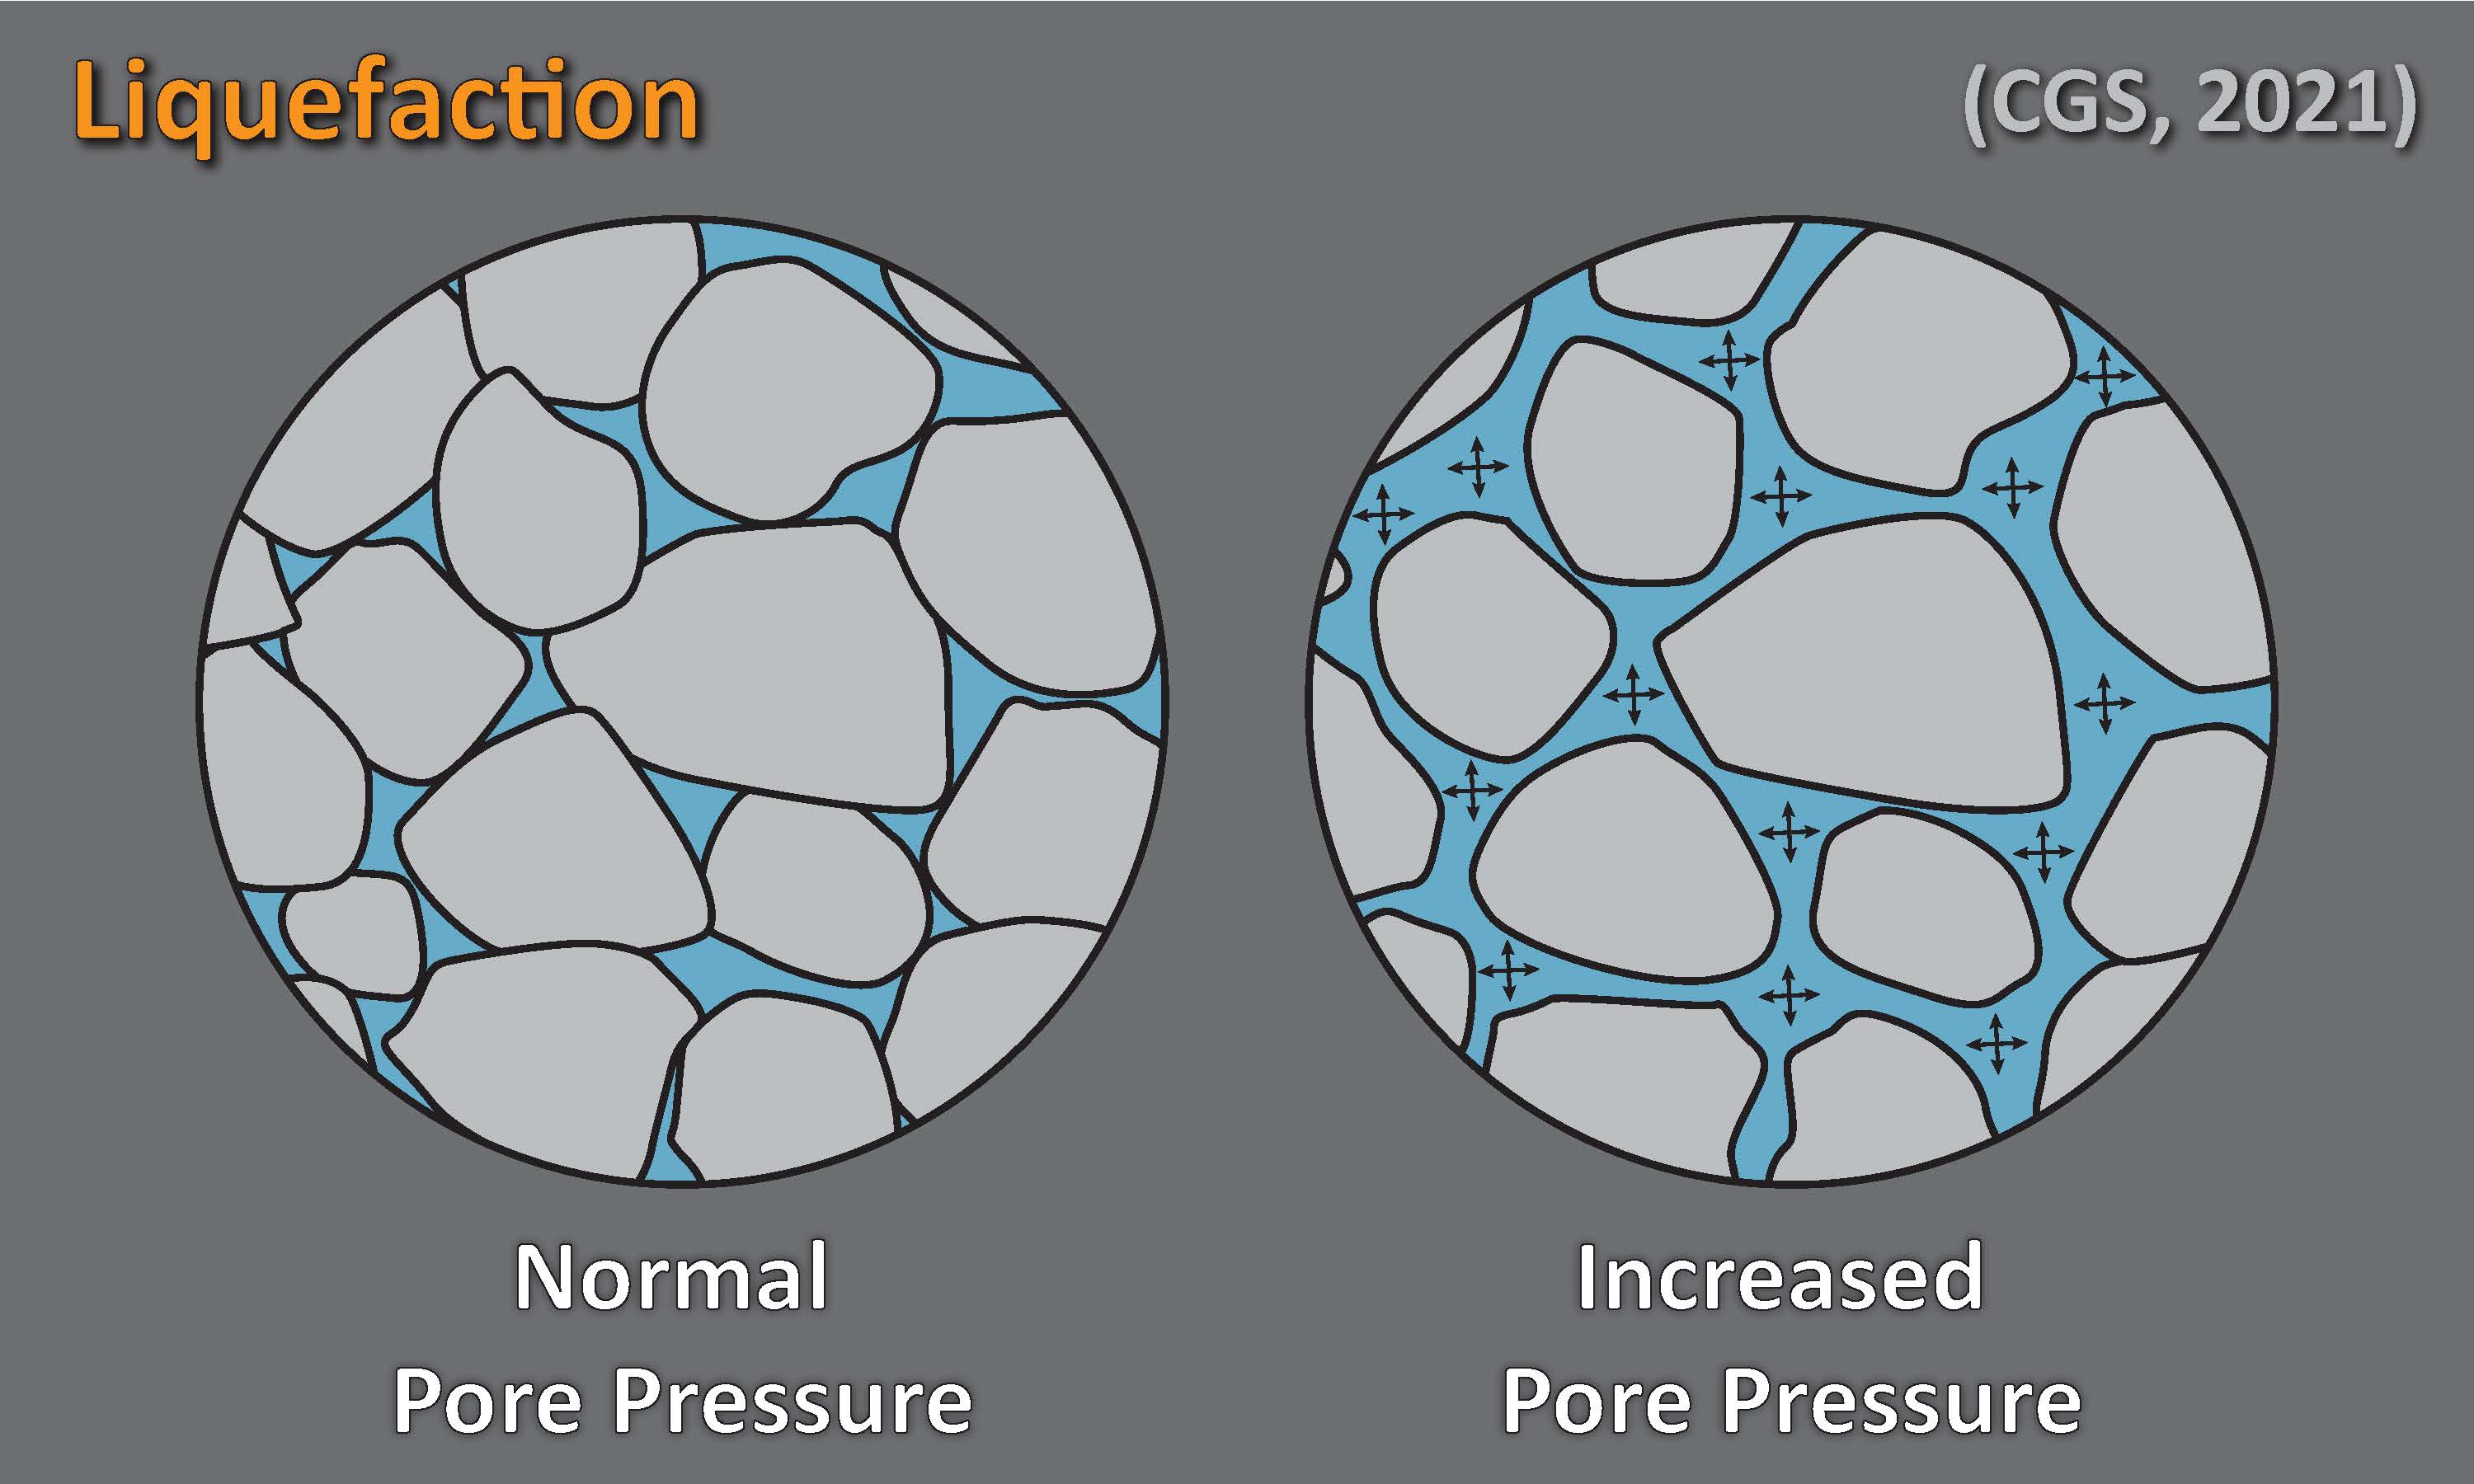 Normal pore pressure shows water between sand grains, but the grains are touching each other. Increased pore pressure shows water pushing the sand grains apart.